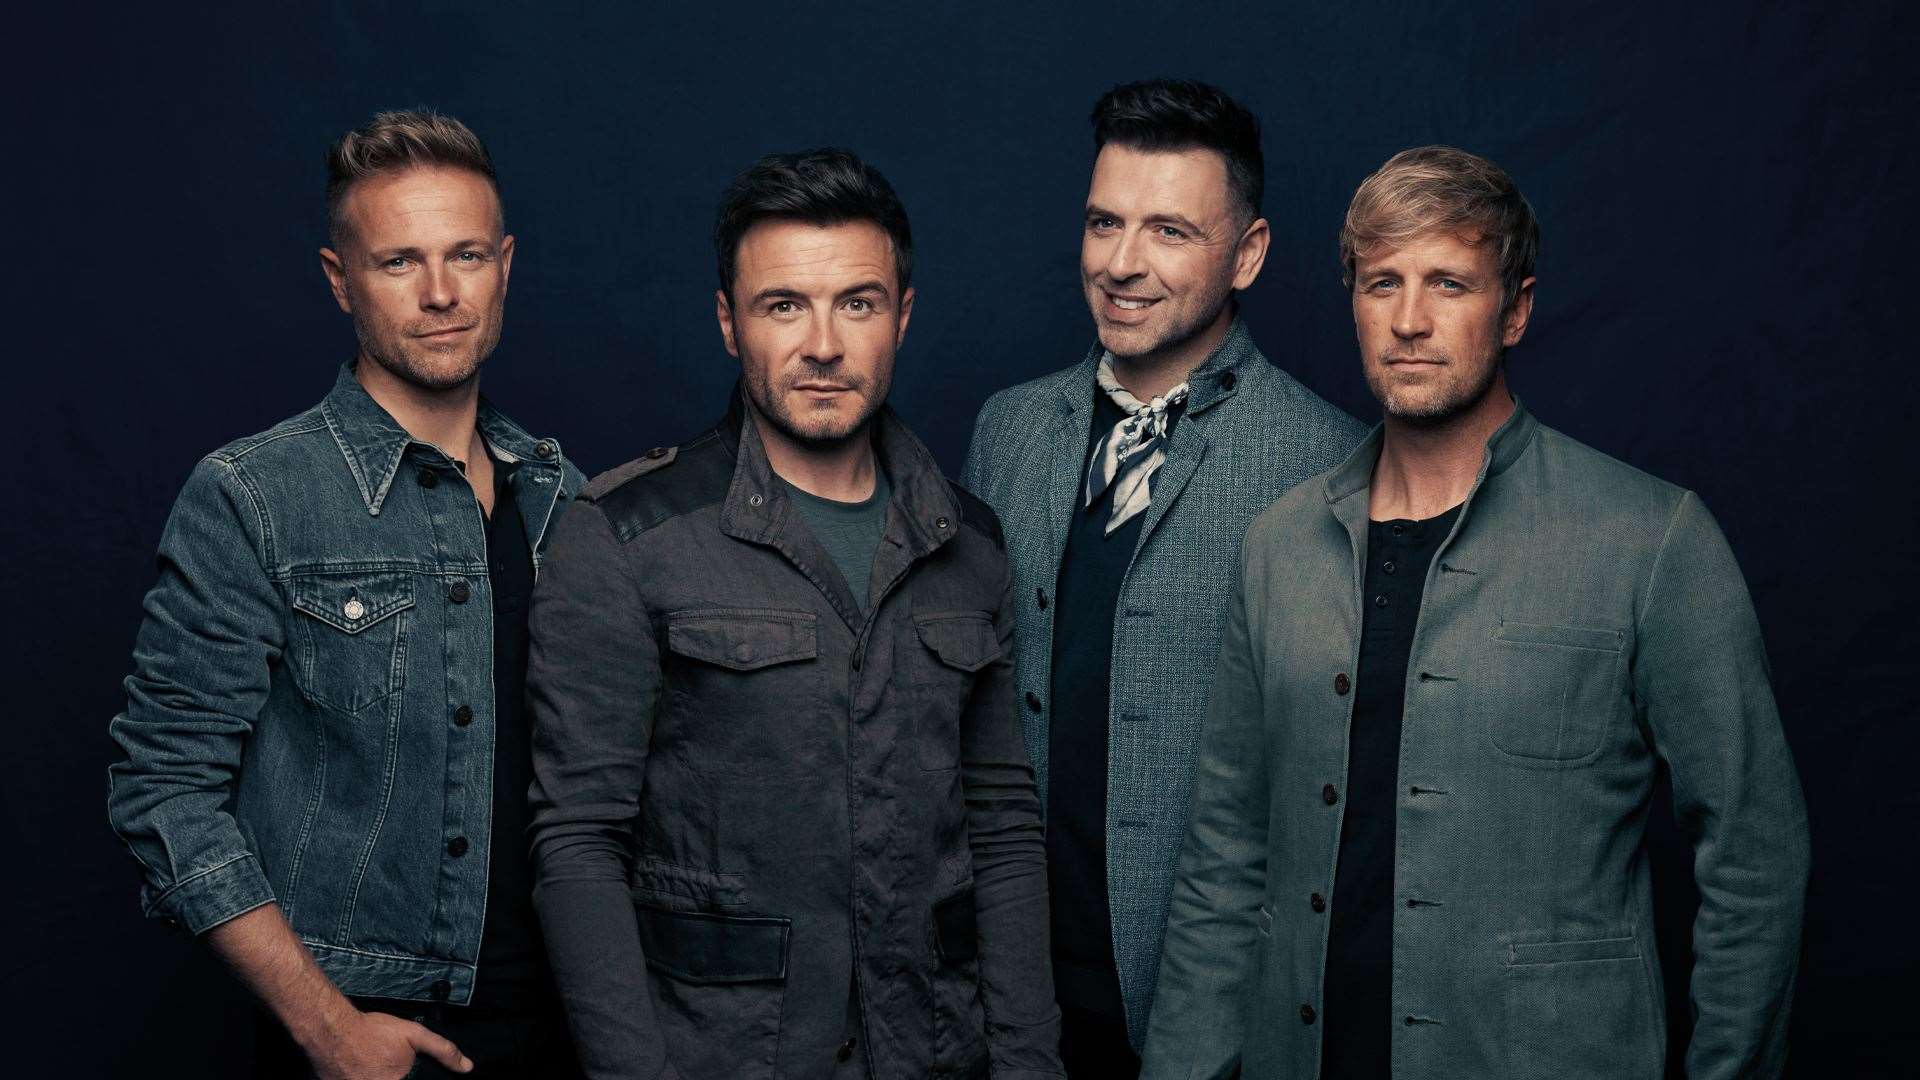 Westlife will play Aberdeen's P&J Live on Thursday, November 17, 2022.